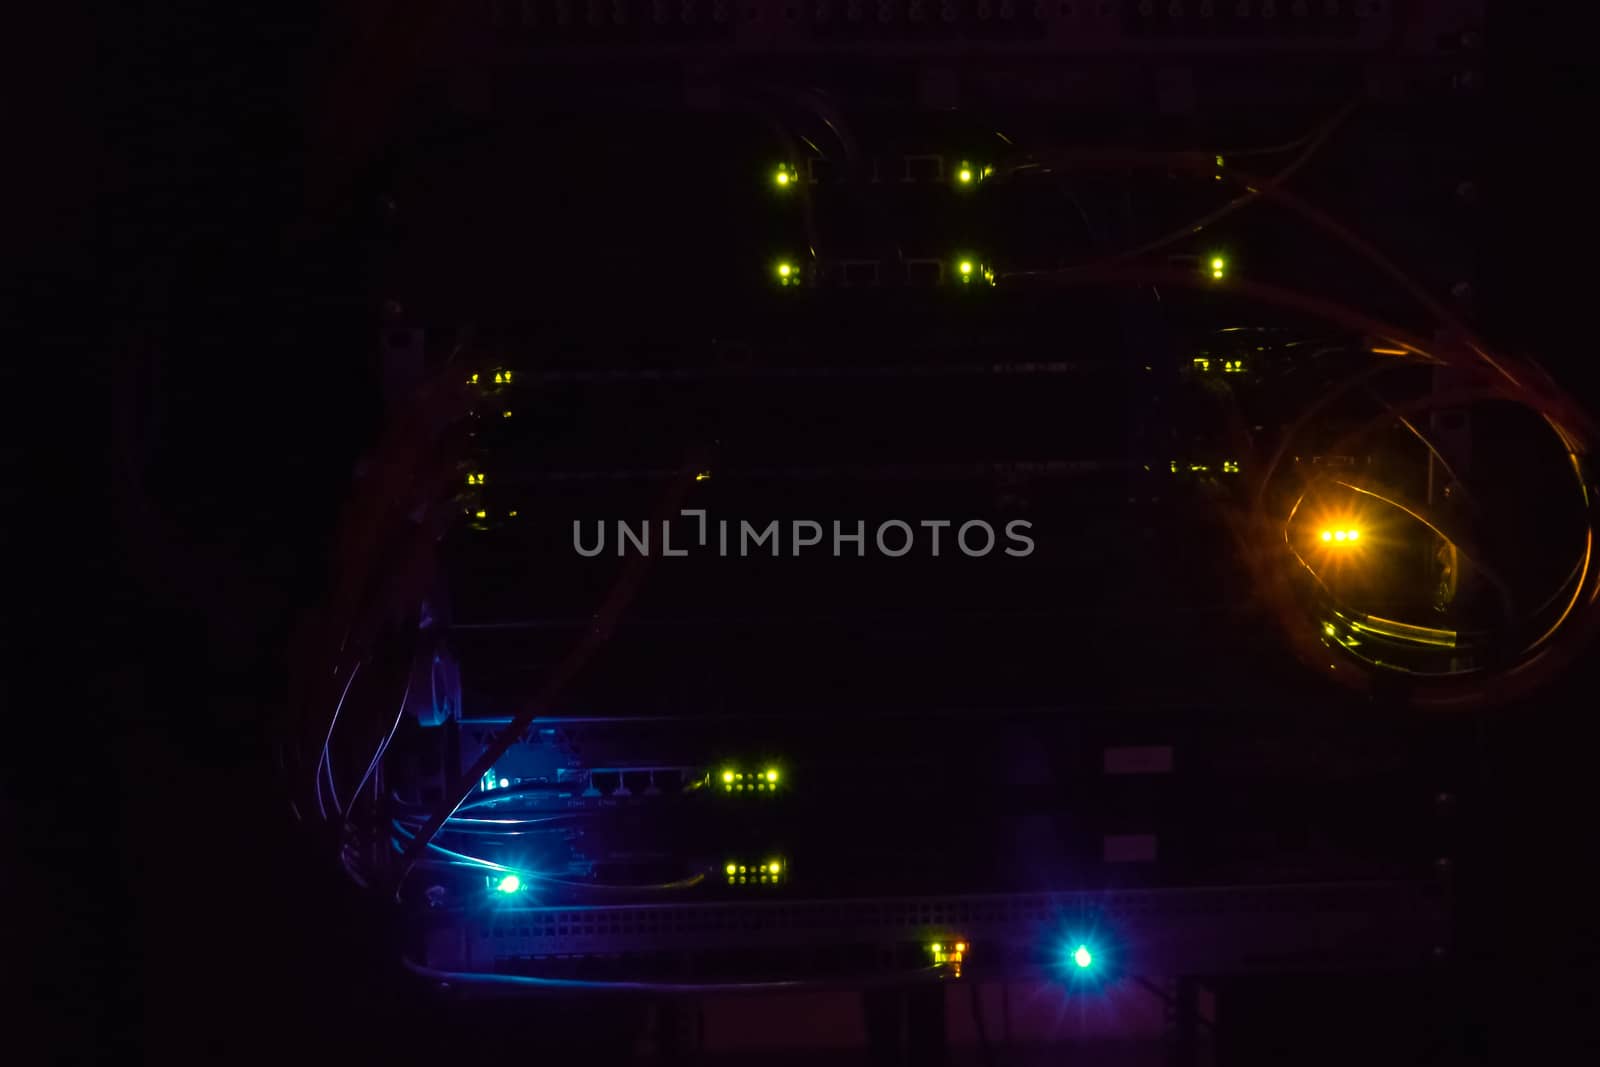 A working server. Internet wires and flashing lights on the server.